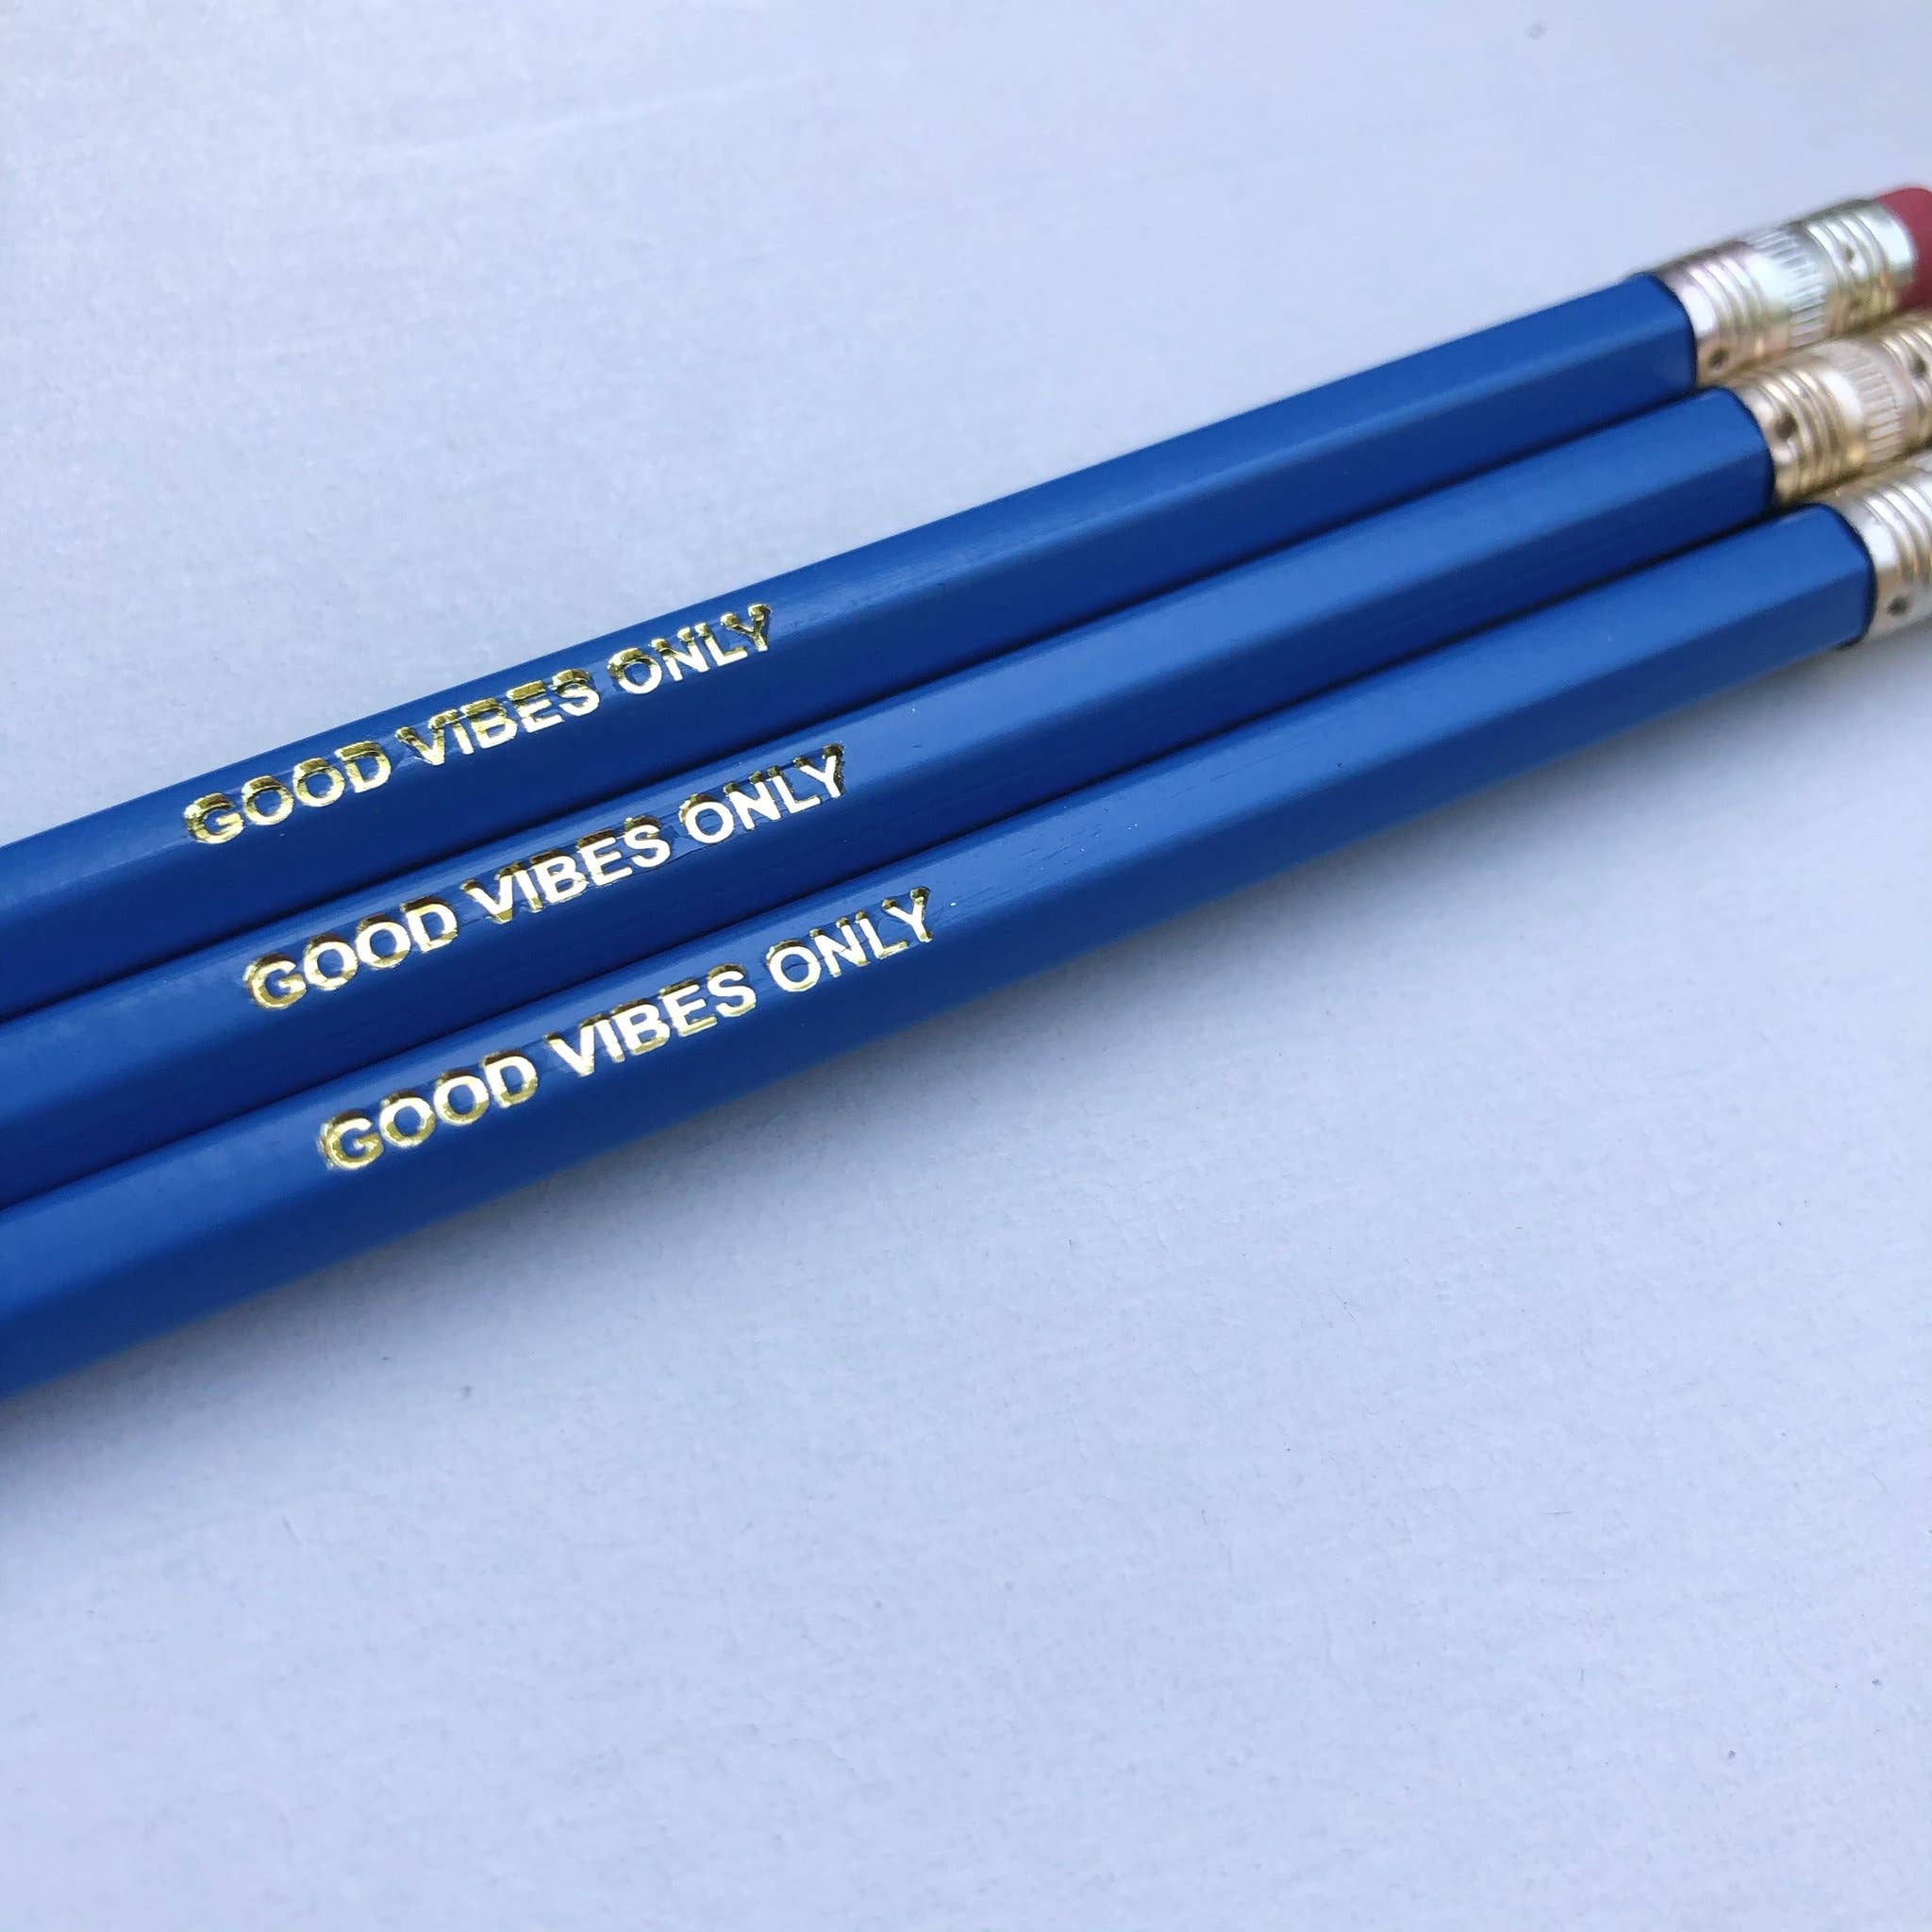 Good Vibes Only Pencil